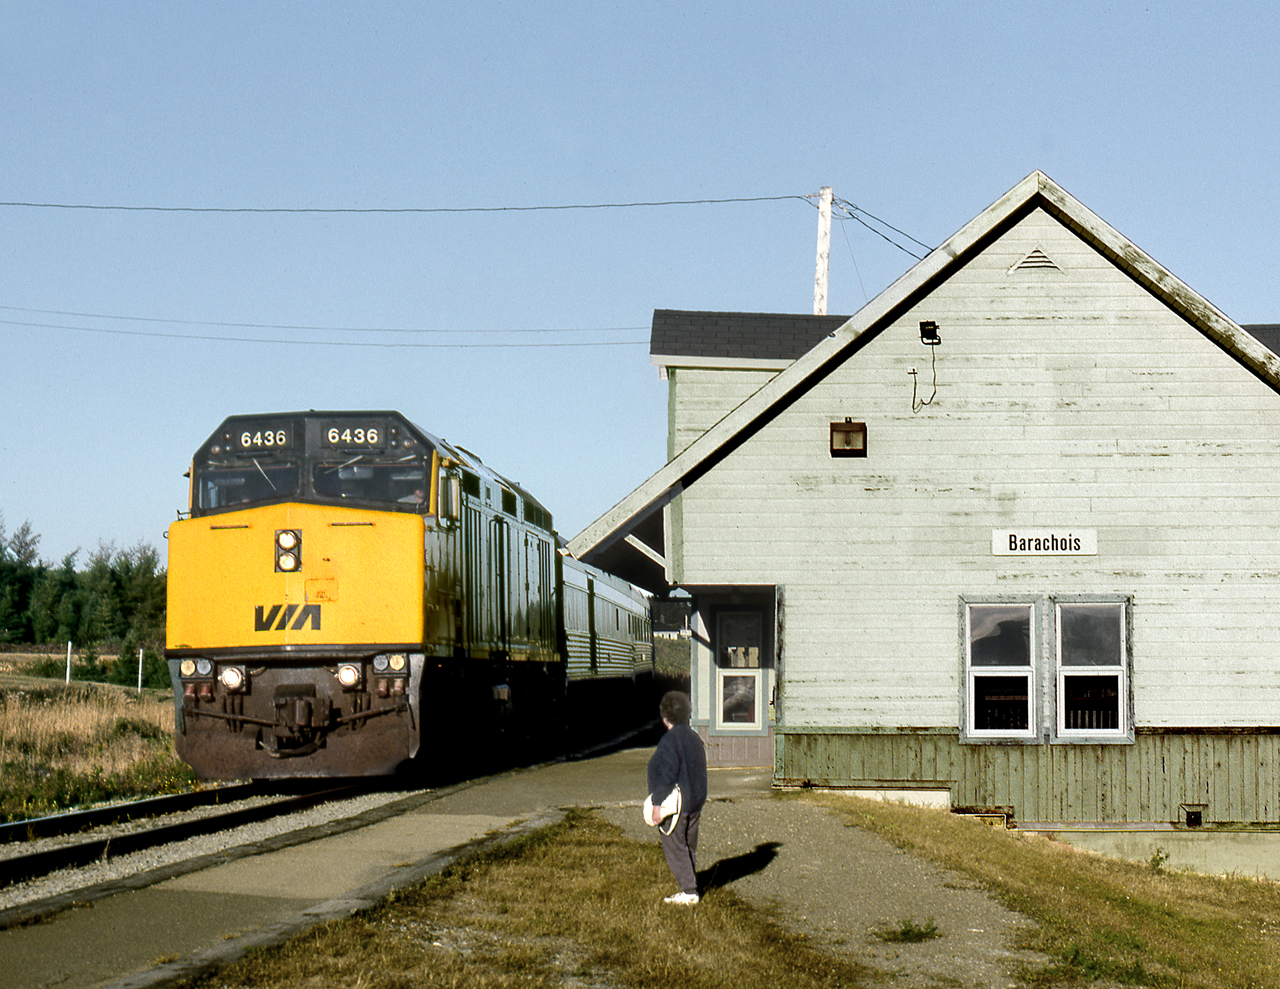 Westbound "Chaleur" from Gaspe to Matapedia pulls up to the station at Barachois on Gaspe's south shore for a regular stop